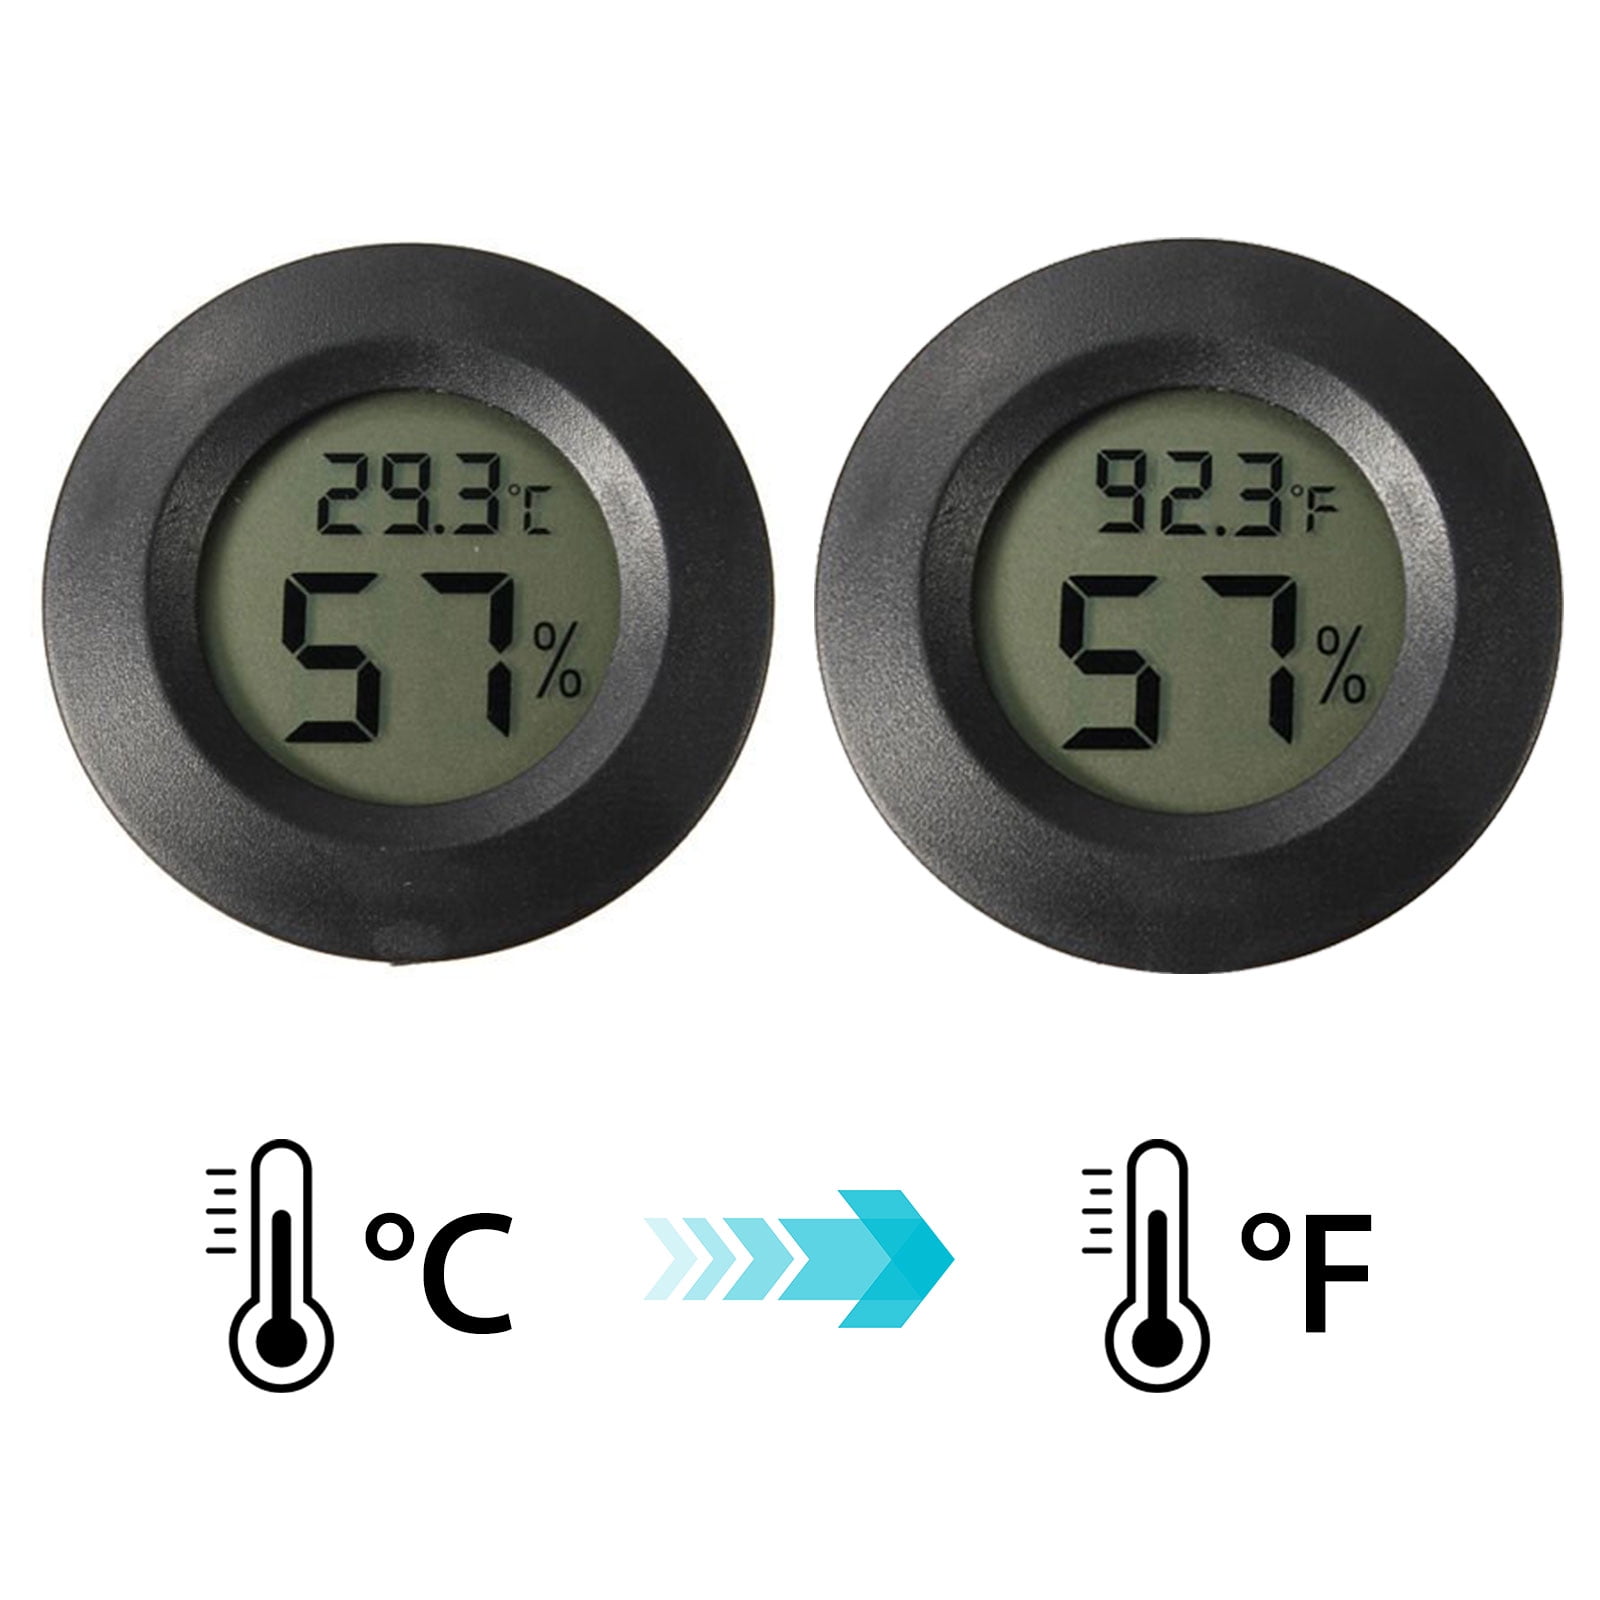 Indoor Outdoor Thermometer Hygrometer,Mini 2 in 1 Temperature Humidity  Gauge,Round Pointer Analog Hygrometer for Indoor Office Home Room Outdoor  W2D6 